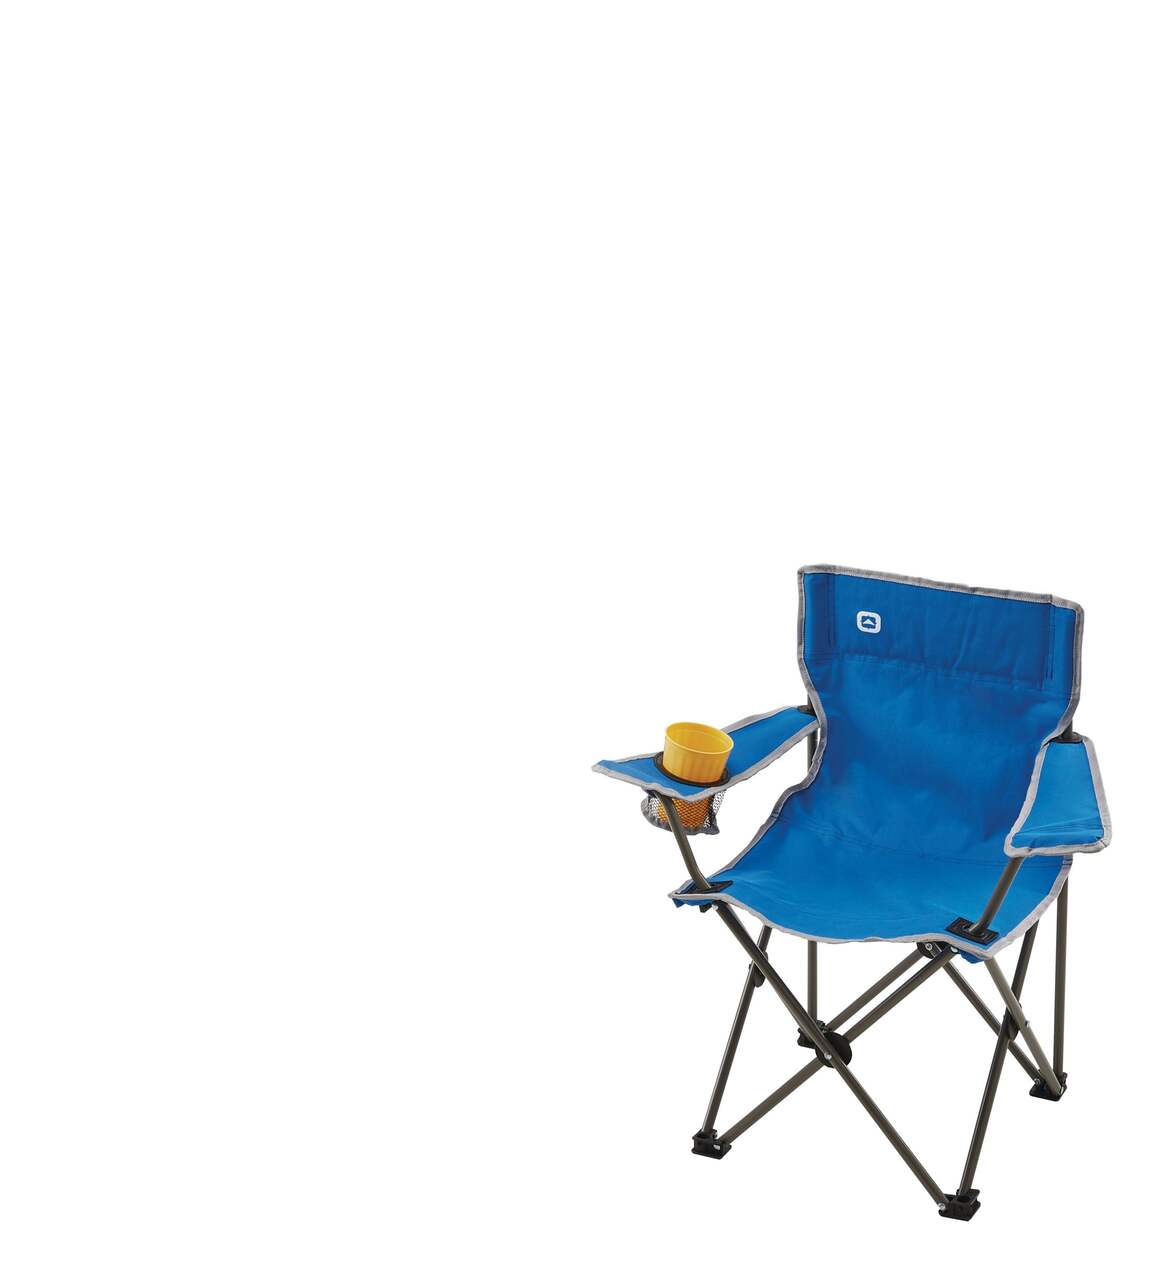 https://media-www.canadiantire.ca/product/playing/camping/camping-furniture/0765473/outbound-kids-folding-chair-07496d57-a139-49b9-bc17-971eb4a3bd81-jpgrendition.jpg?imdensity=1&imwidth=1244&impolicy=mZoom